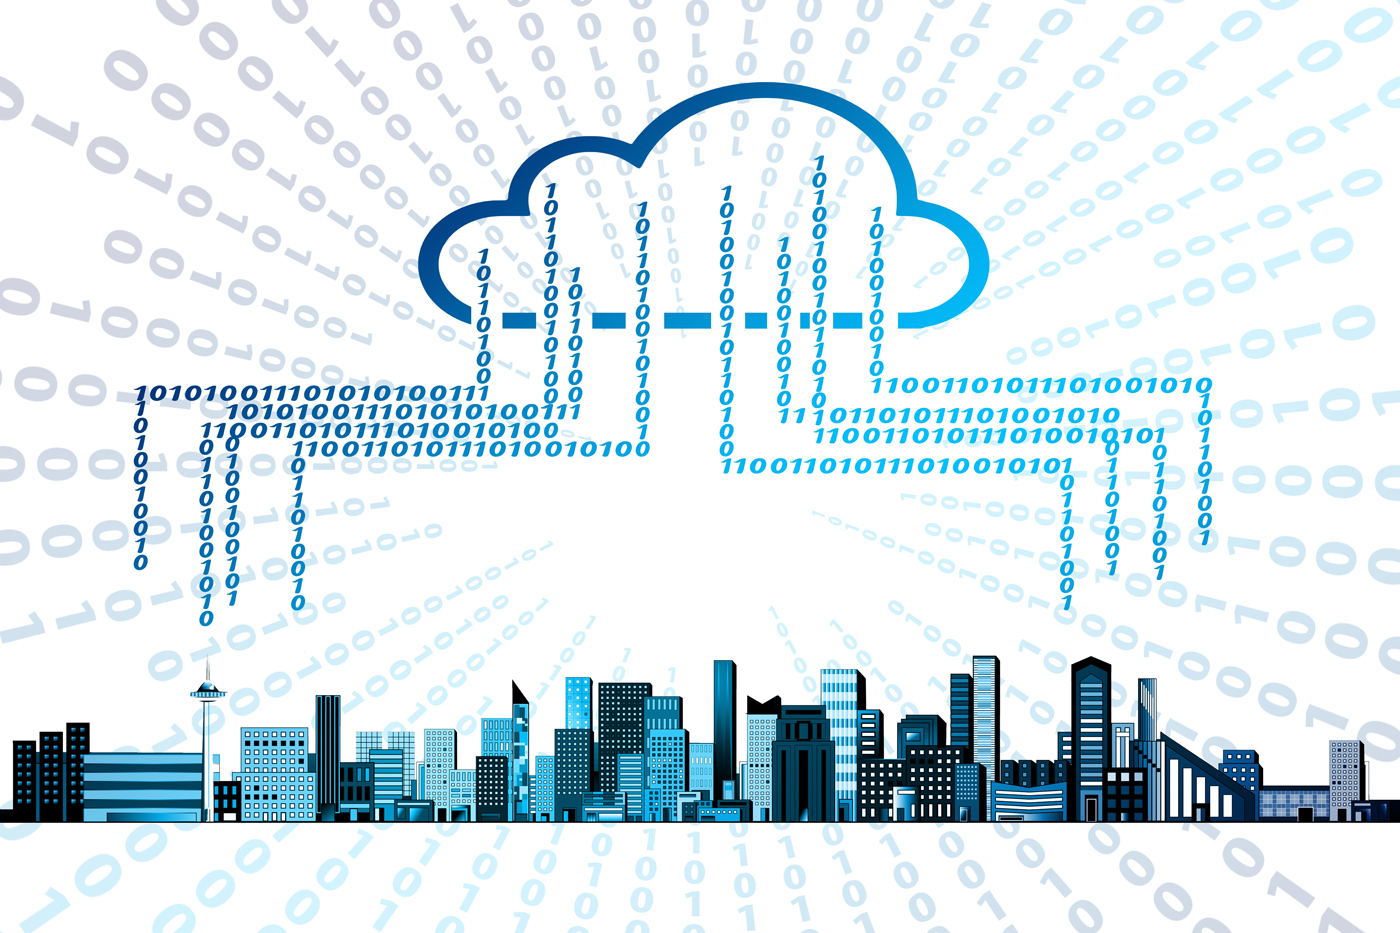 A graphic of a cloud with binary code falling from it above a city scape